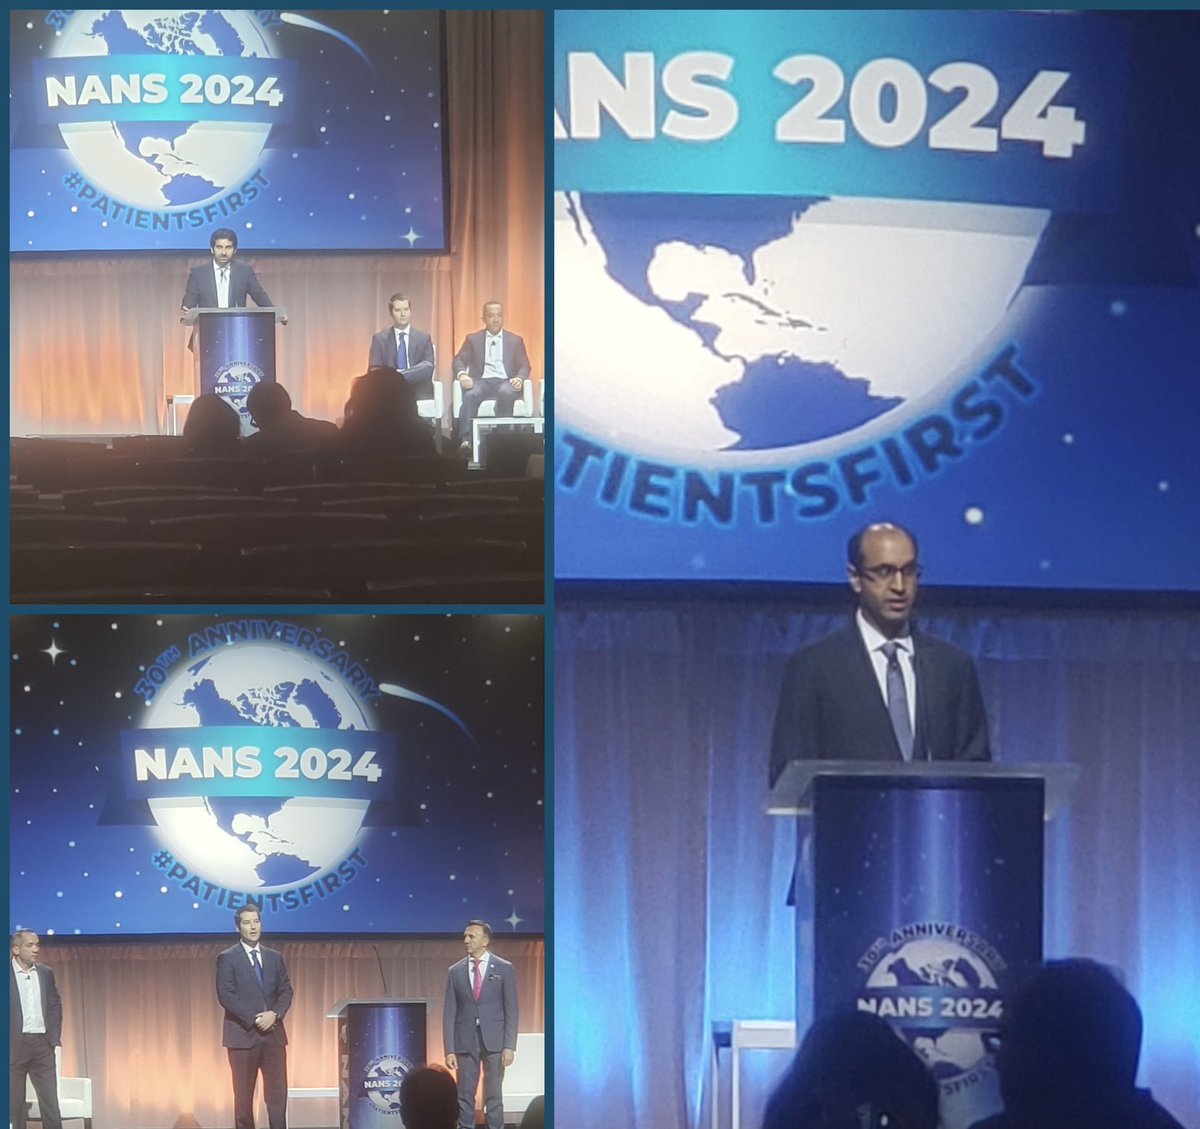 Honored to have participated in our plenary session on DBS & FUS for tremor with Dr Moosa at #NANS24 @MCWNeurosurgery @NANS_ION @NeuroscienceMCW